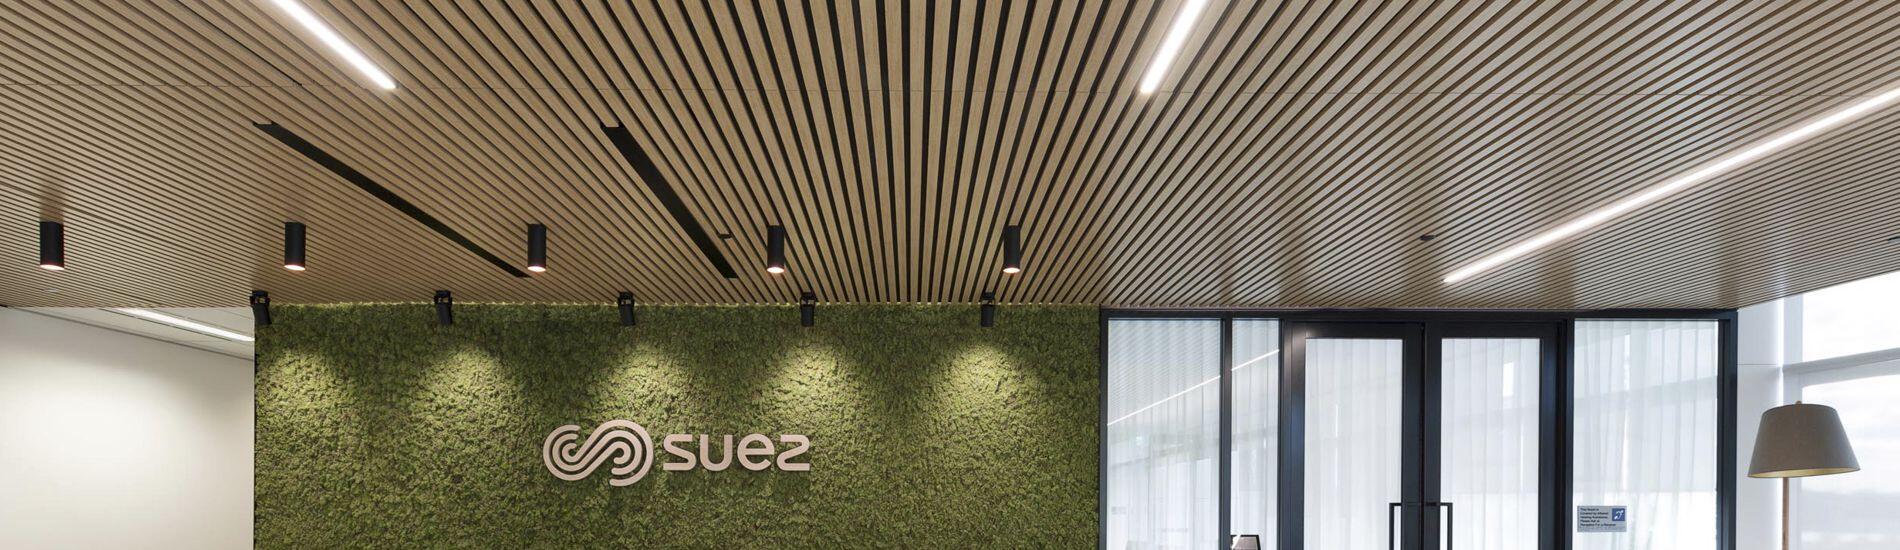 SUPASLAT Acoustic Slatted Ceiling Throughout Workplace Reception